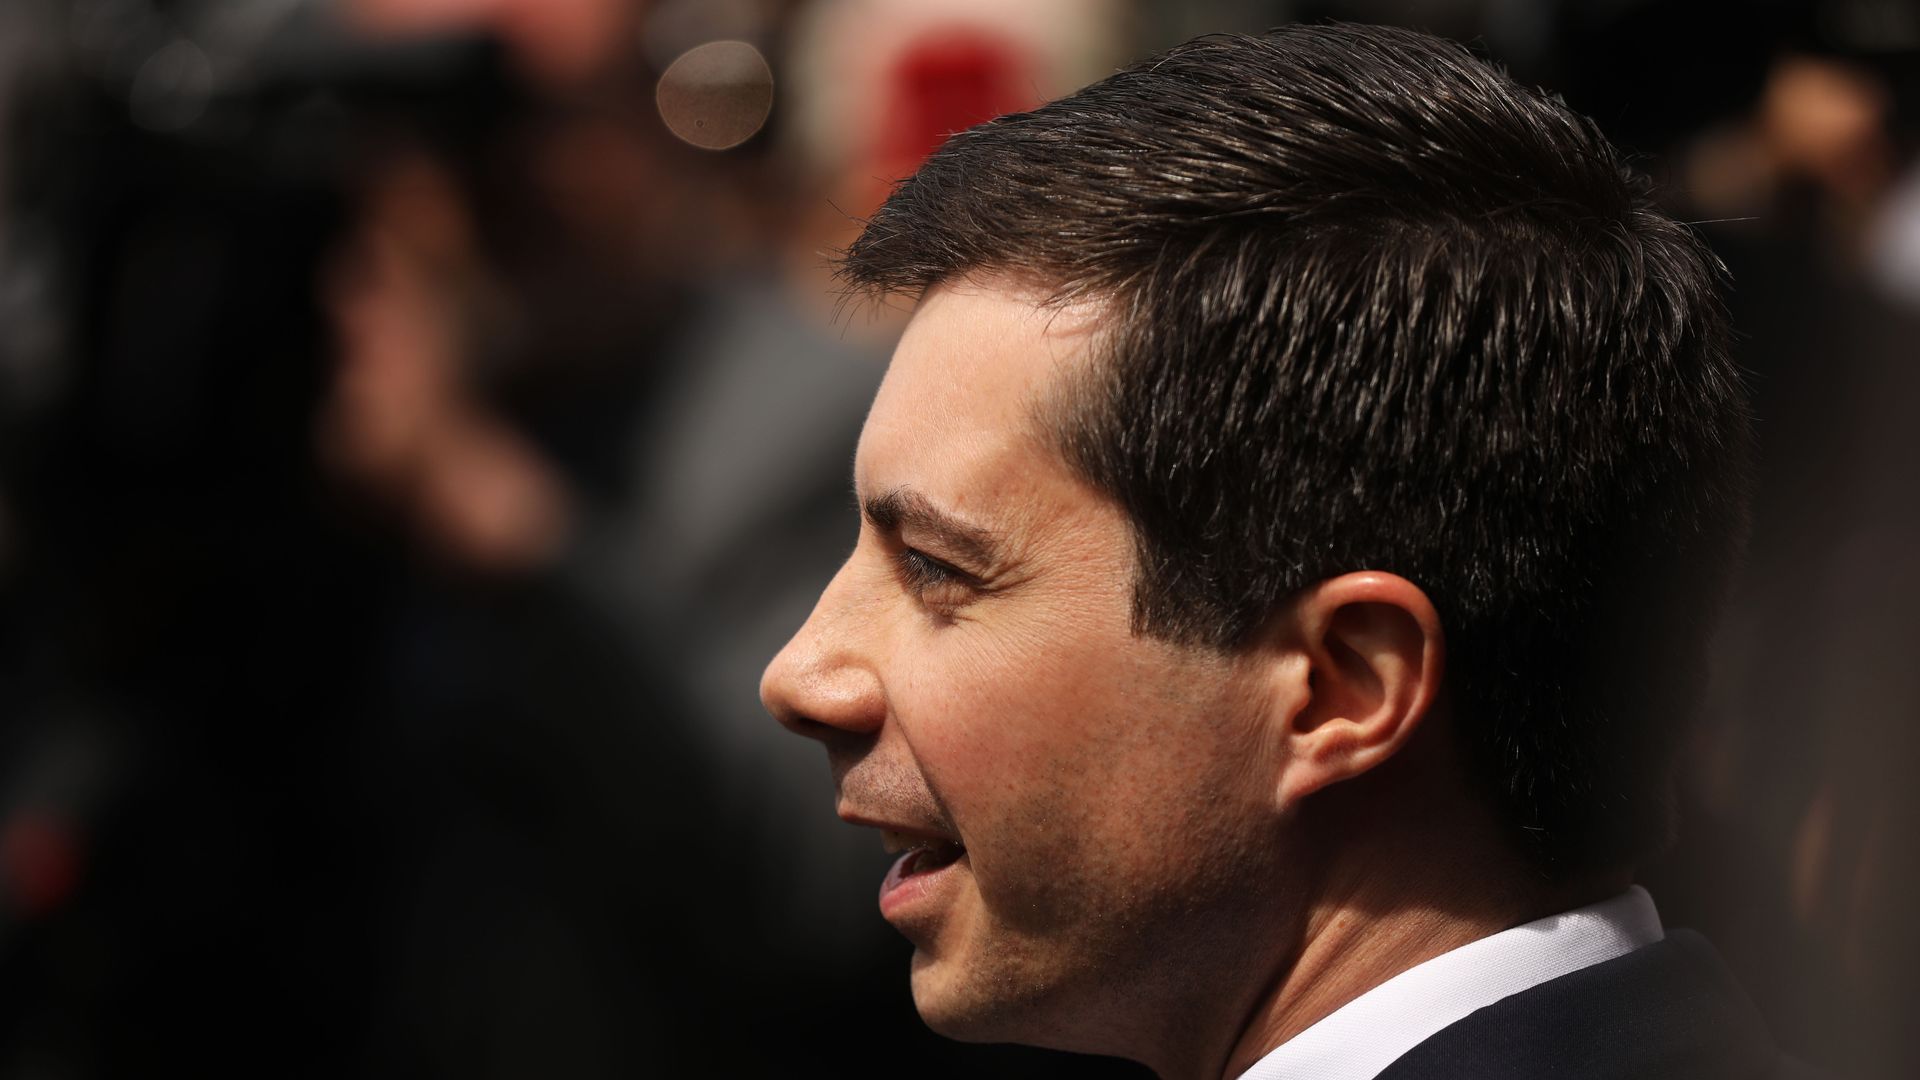 This image is a profile view of Pete Buttigieg, who stands and walks in a suit.